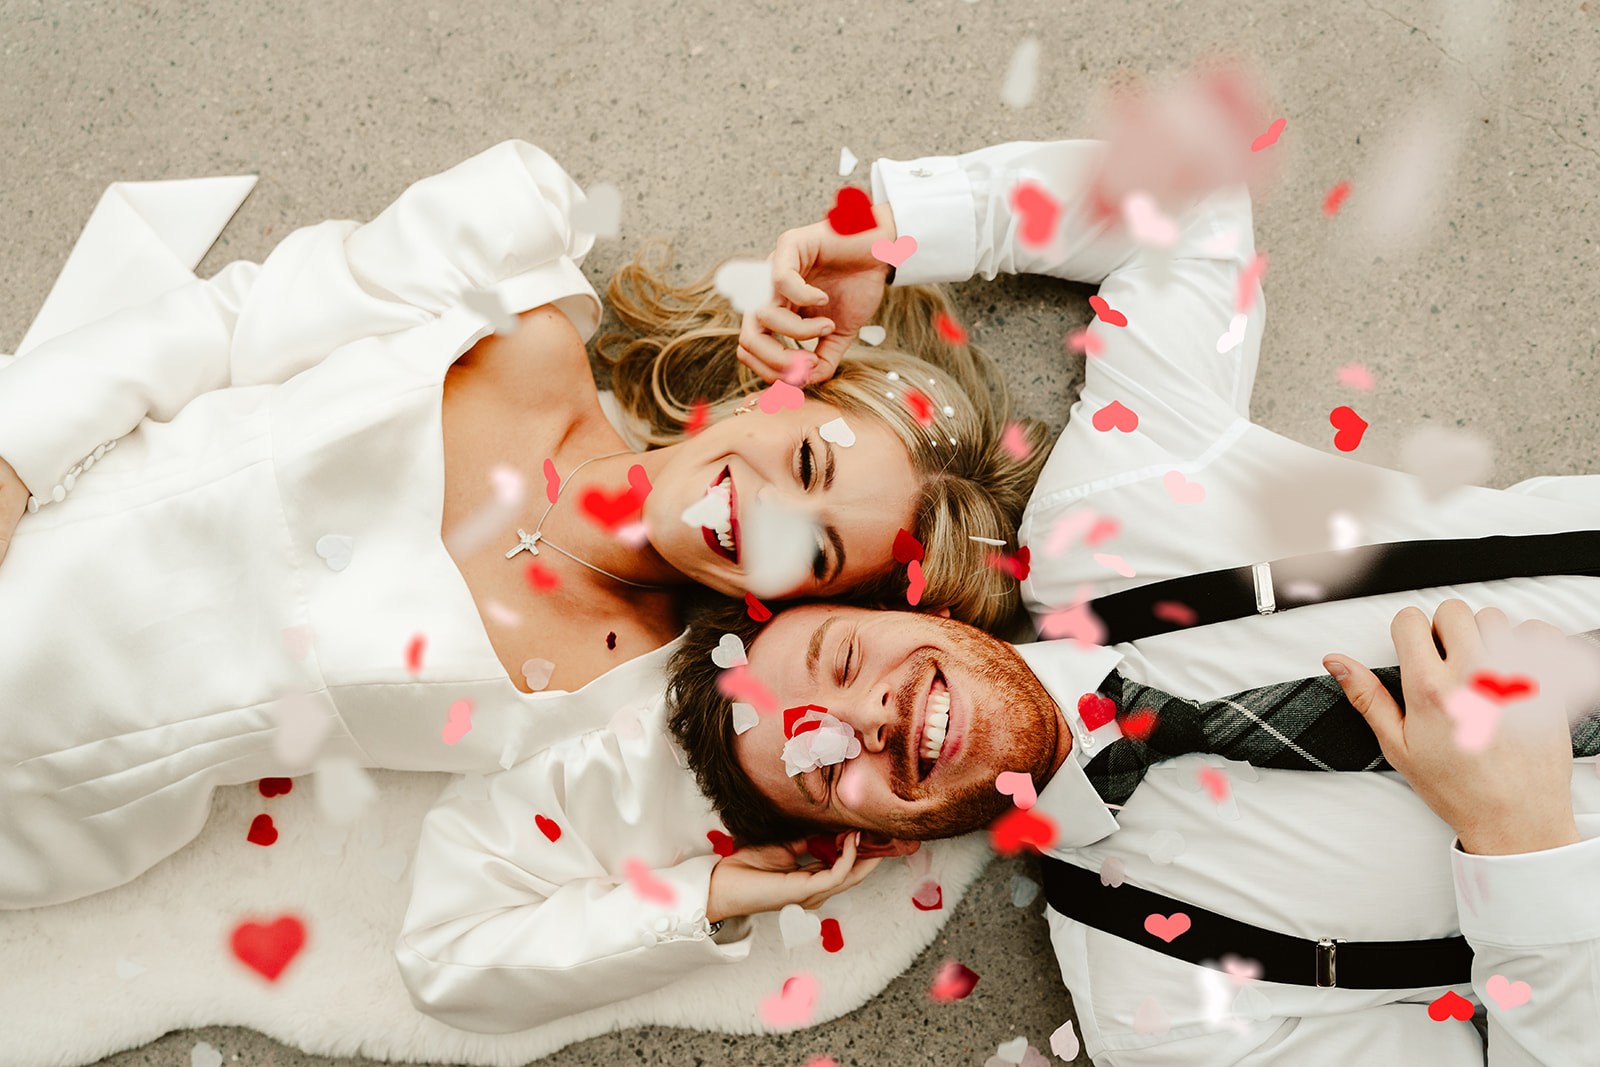 pink and red confetti falls on bride and groom photo taken from above as they lie on the floor